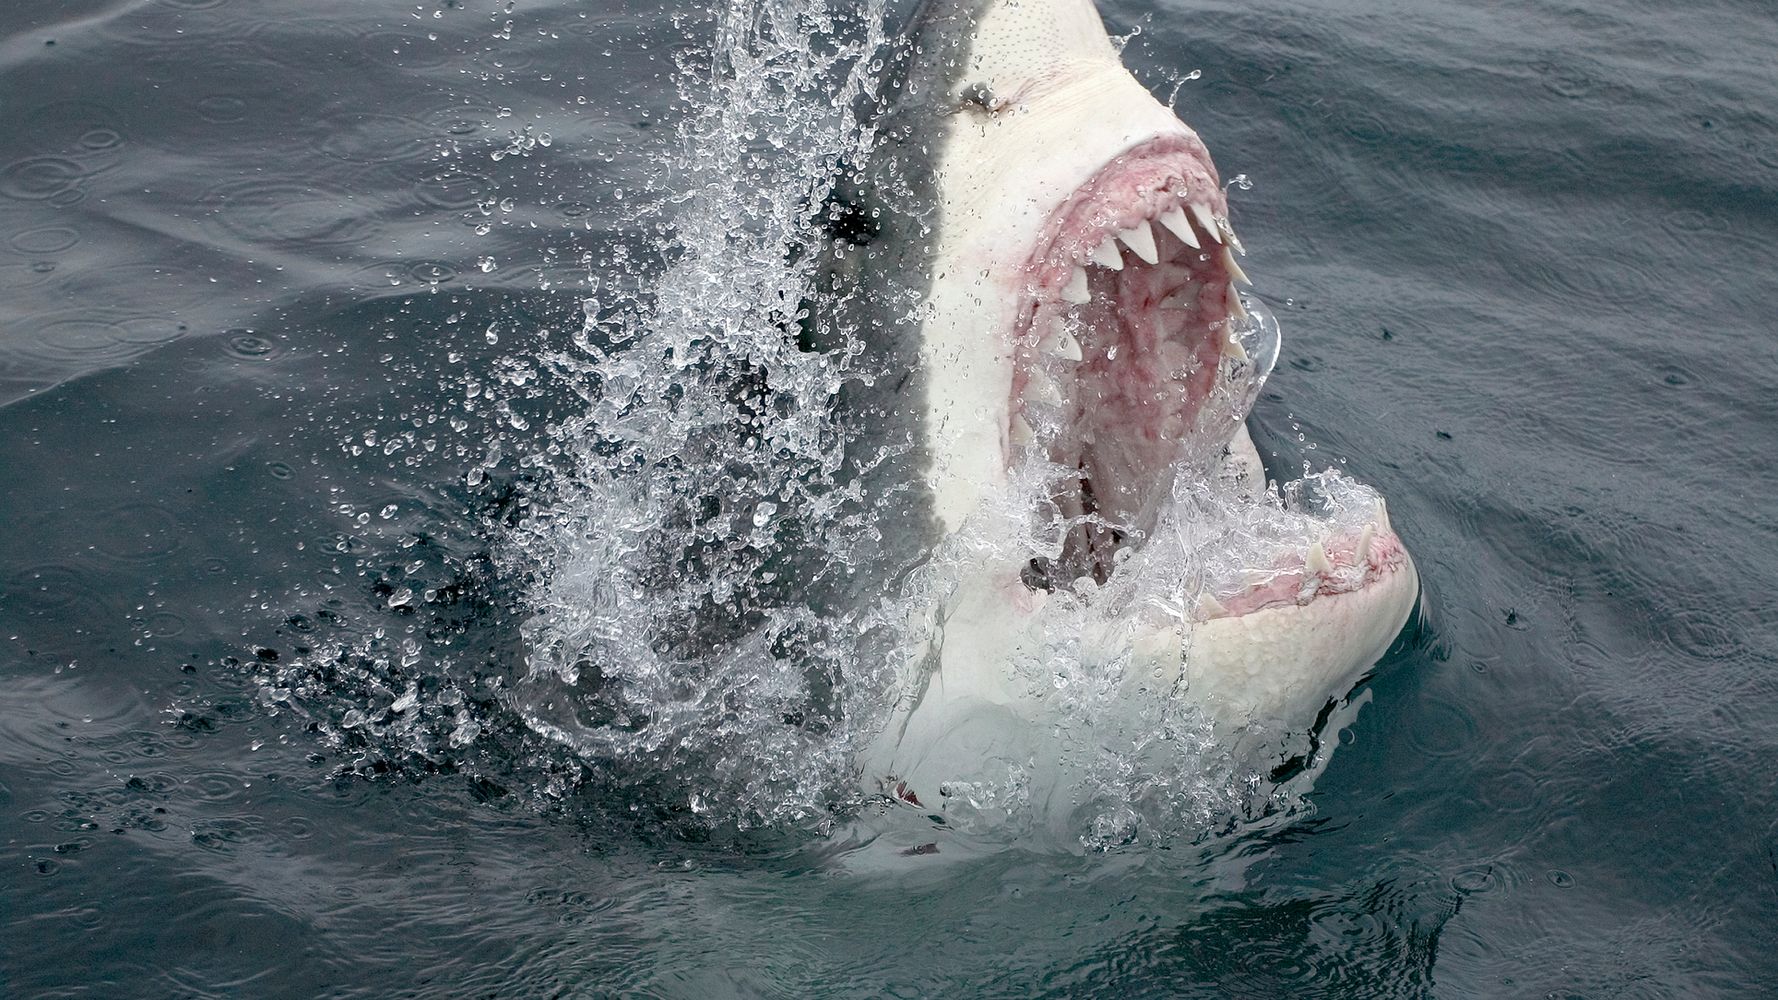 Sharks aren't criminals, but our fear makes us talk as if they are